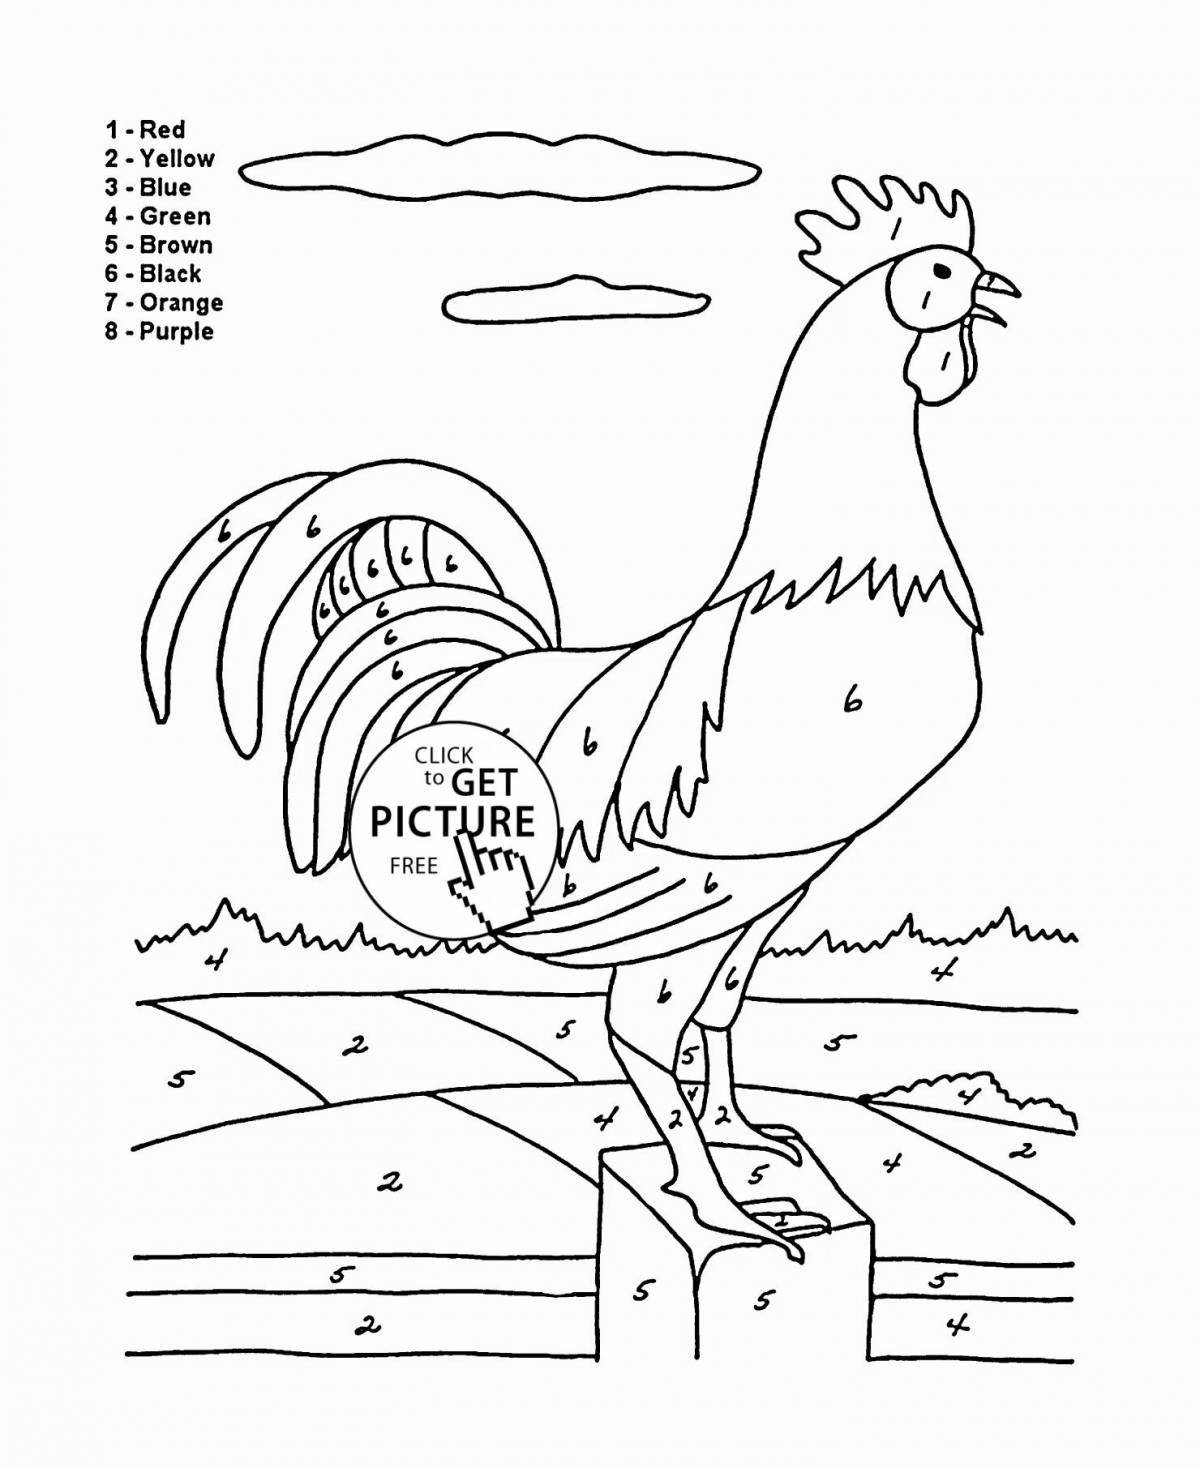 Attractive poultry coloring page for 5-7 year olds